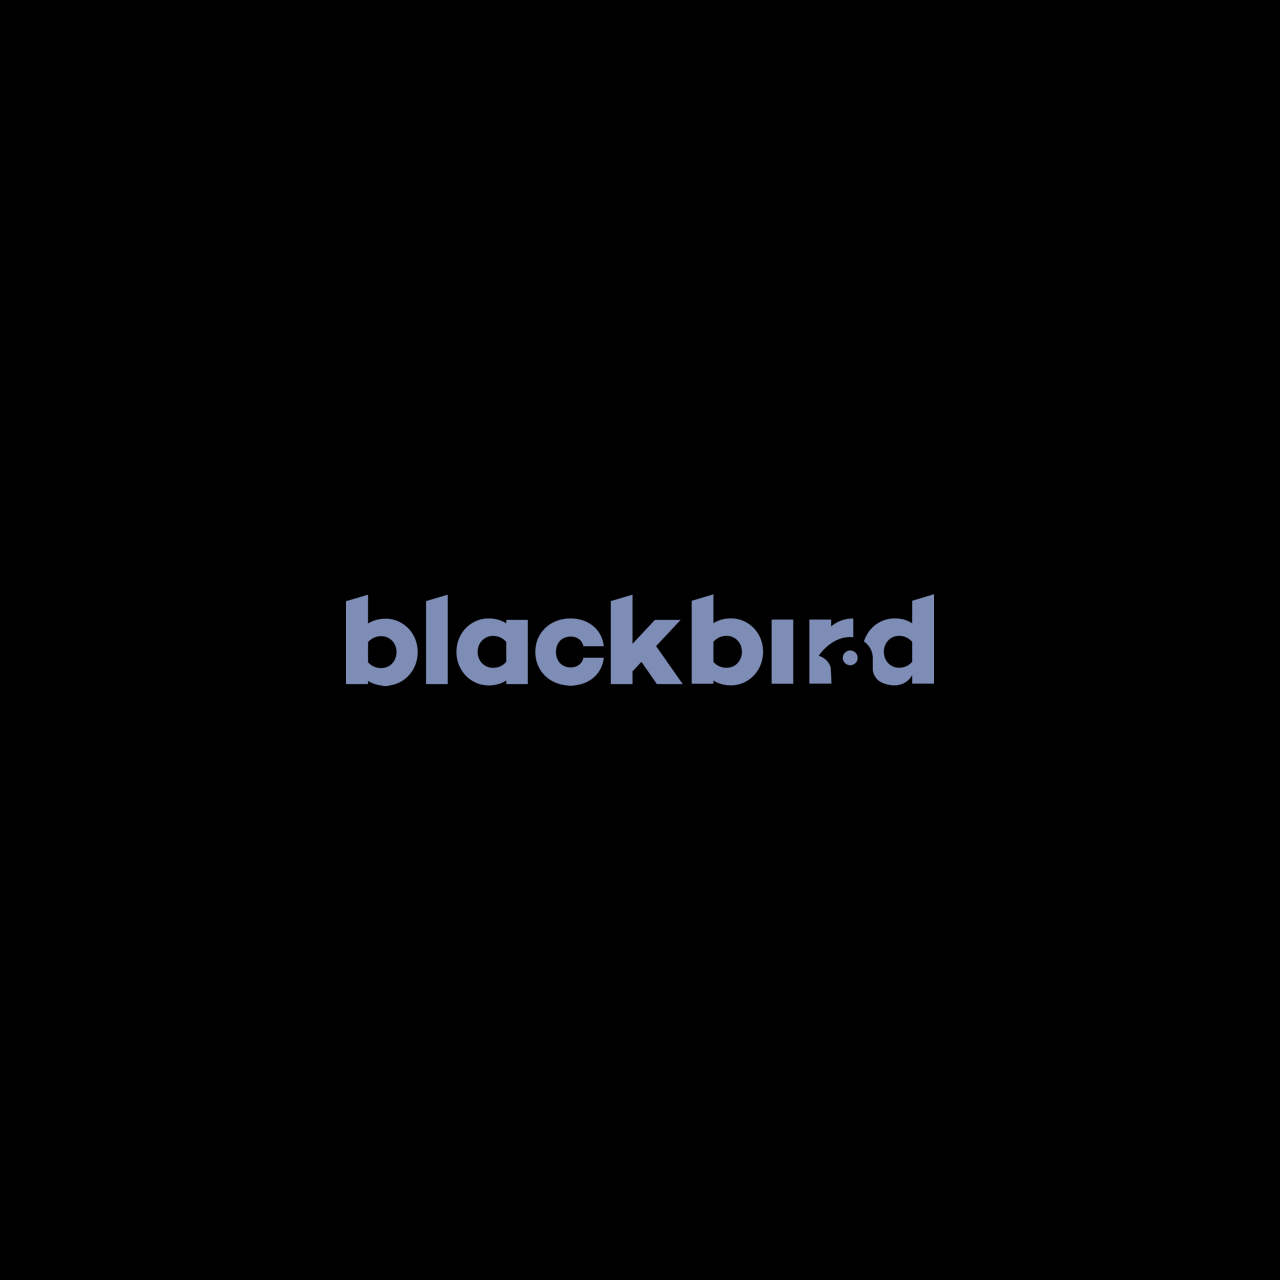 Logo for the Blackbird agency with a bird in counter-form between the letters R and D.